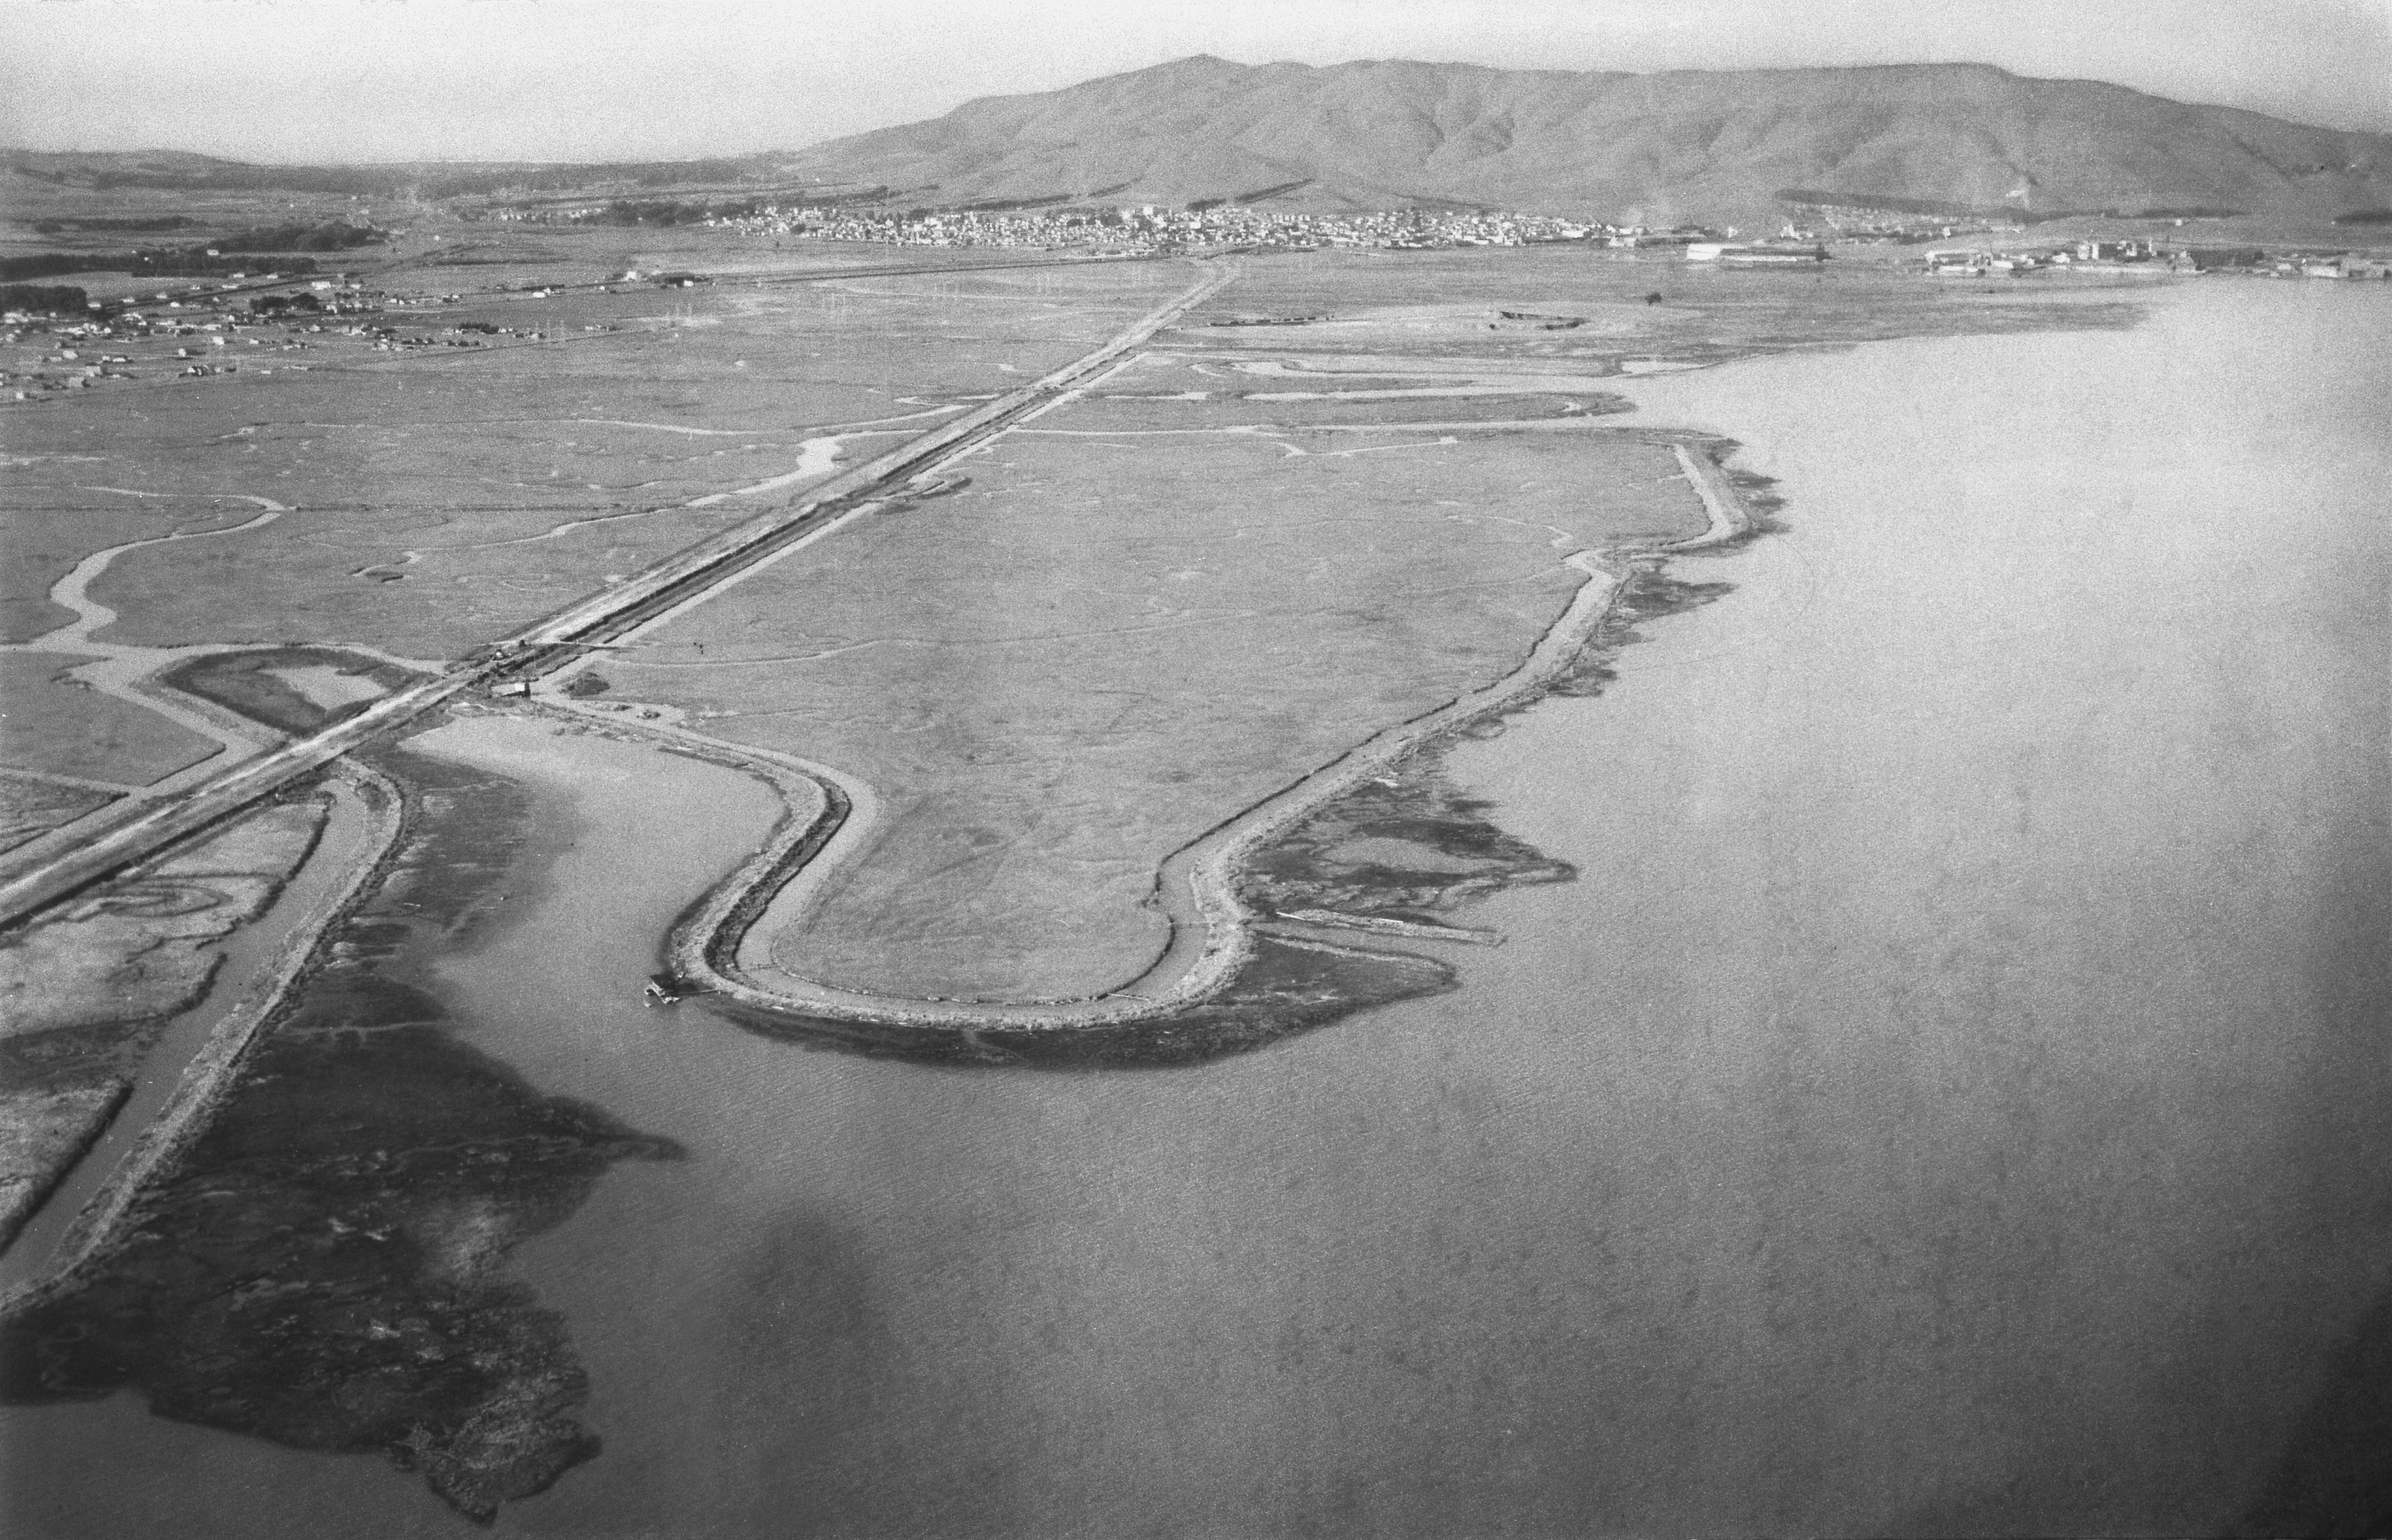 From attached handwritten note: “View N. Site of Mills Field 03542 January 1927”. Black and white copy negative depicting oblique aerial view over Mills Field Municipal Airport of San Francisco, facing north with San Francisco Bay at right and old Bayshore Highway at left; structures visible in background against San Bruno Mountain; Mills Field Municipal Airport of San Francisco; photo taken January 1927; inscribed on white border, right: “JAN 1927”.